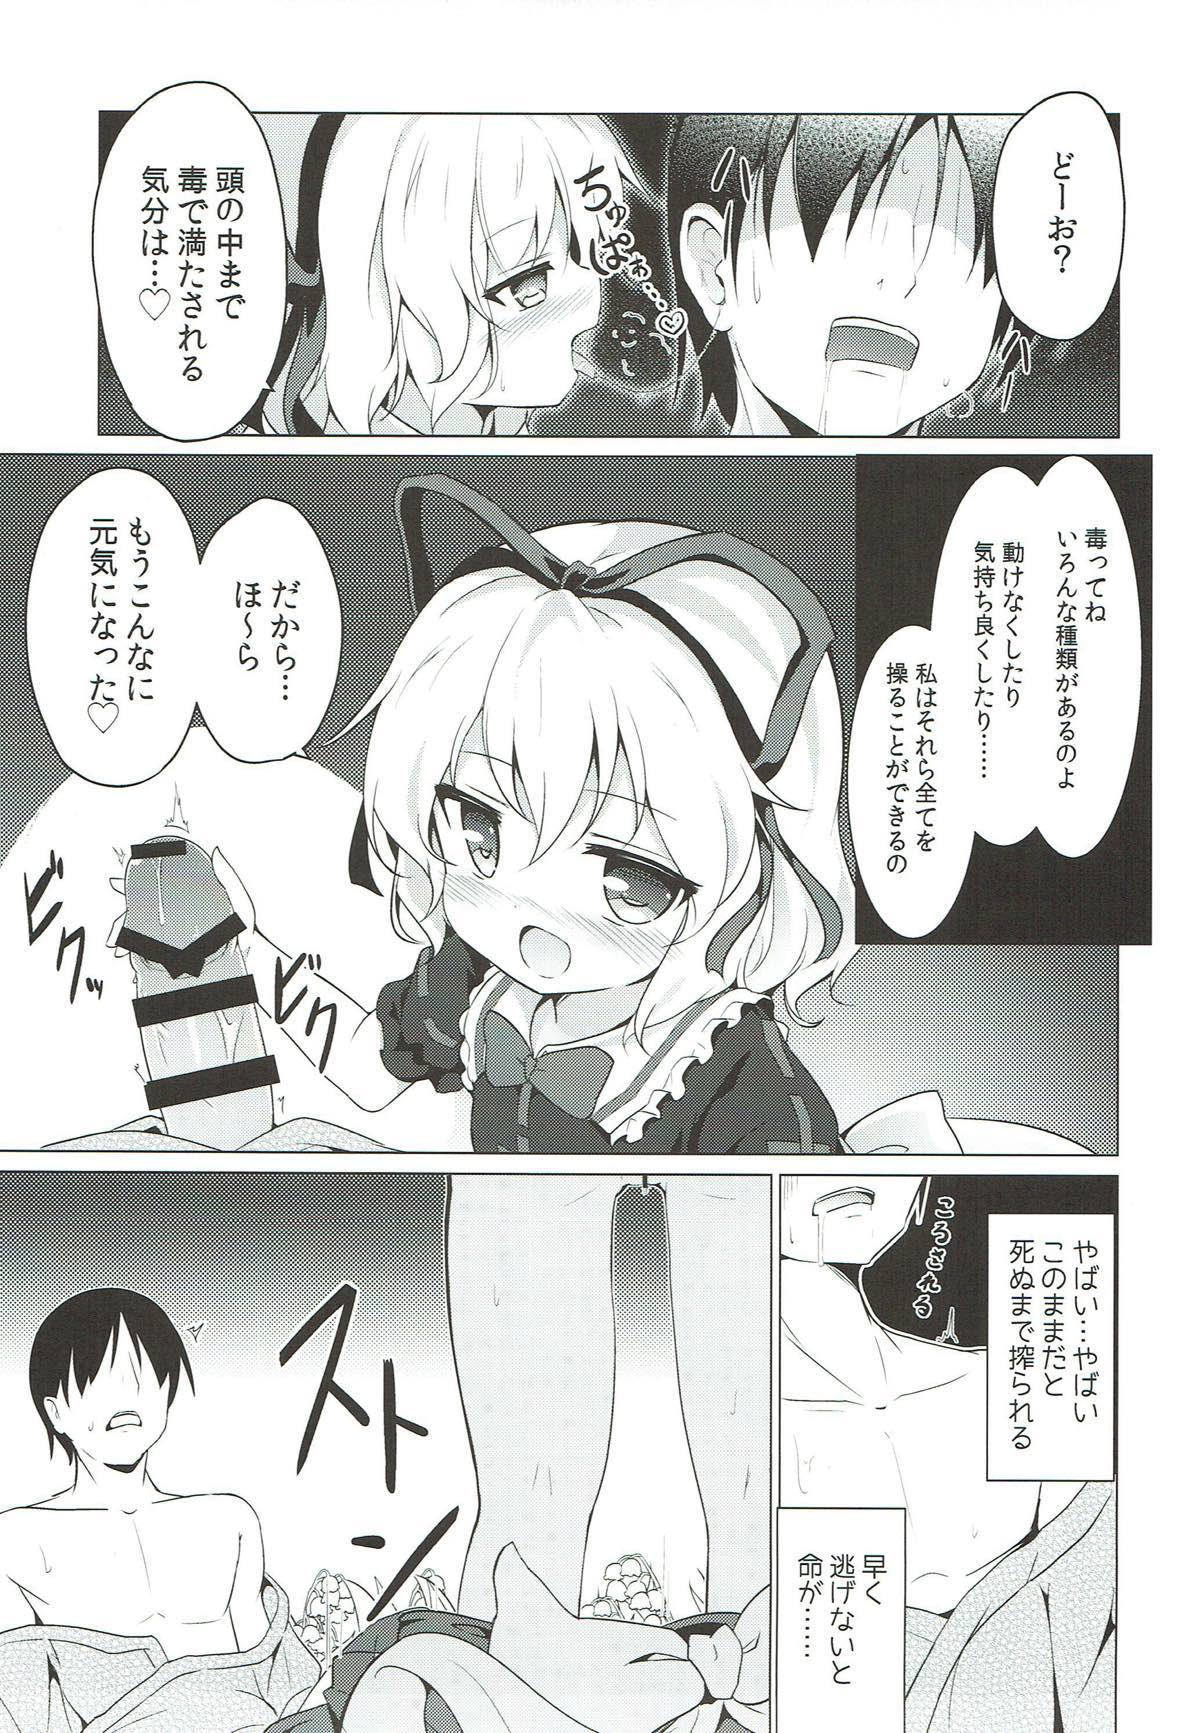 Japanese Melancholic Syndrome - Touhou project Blackdick - Page 8